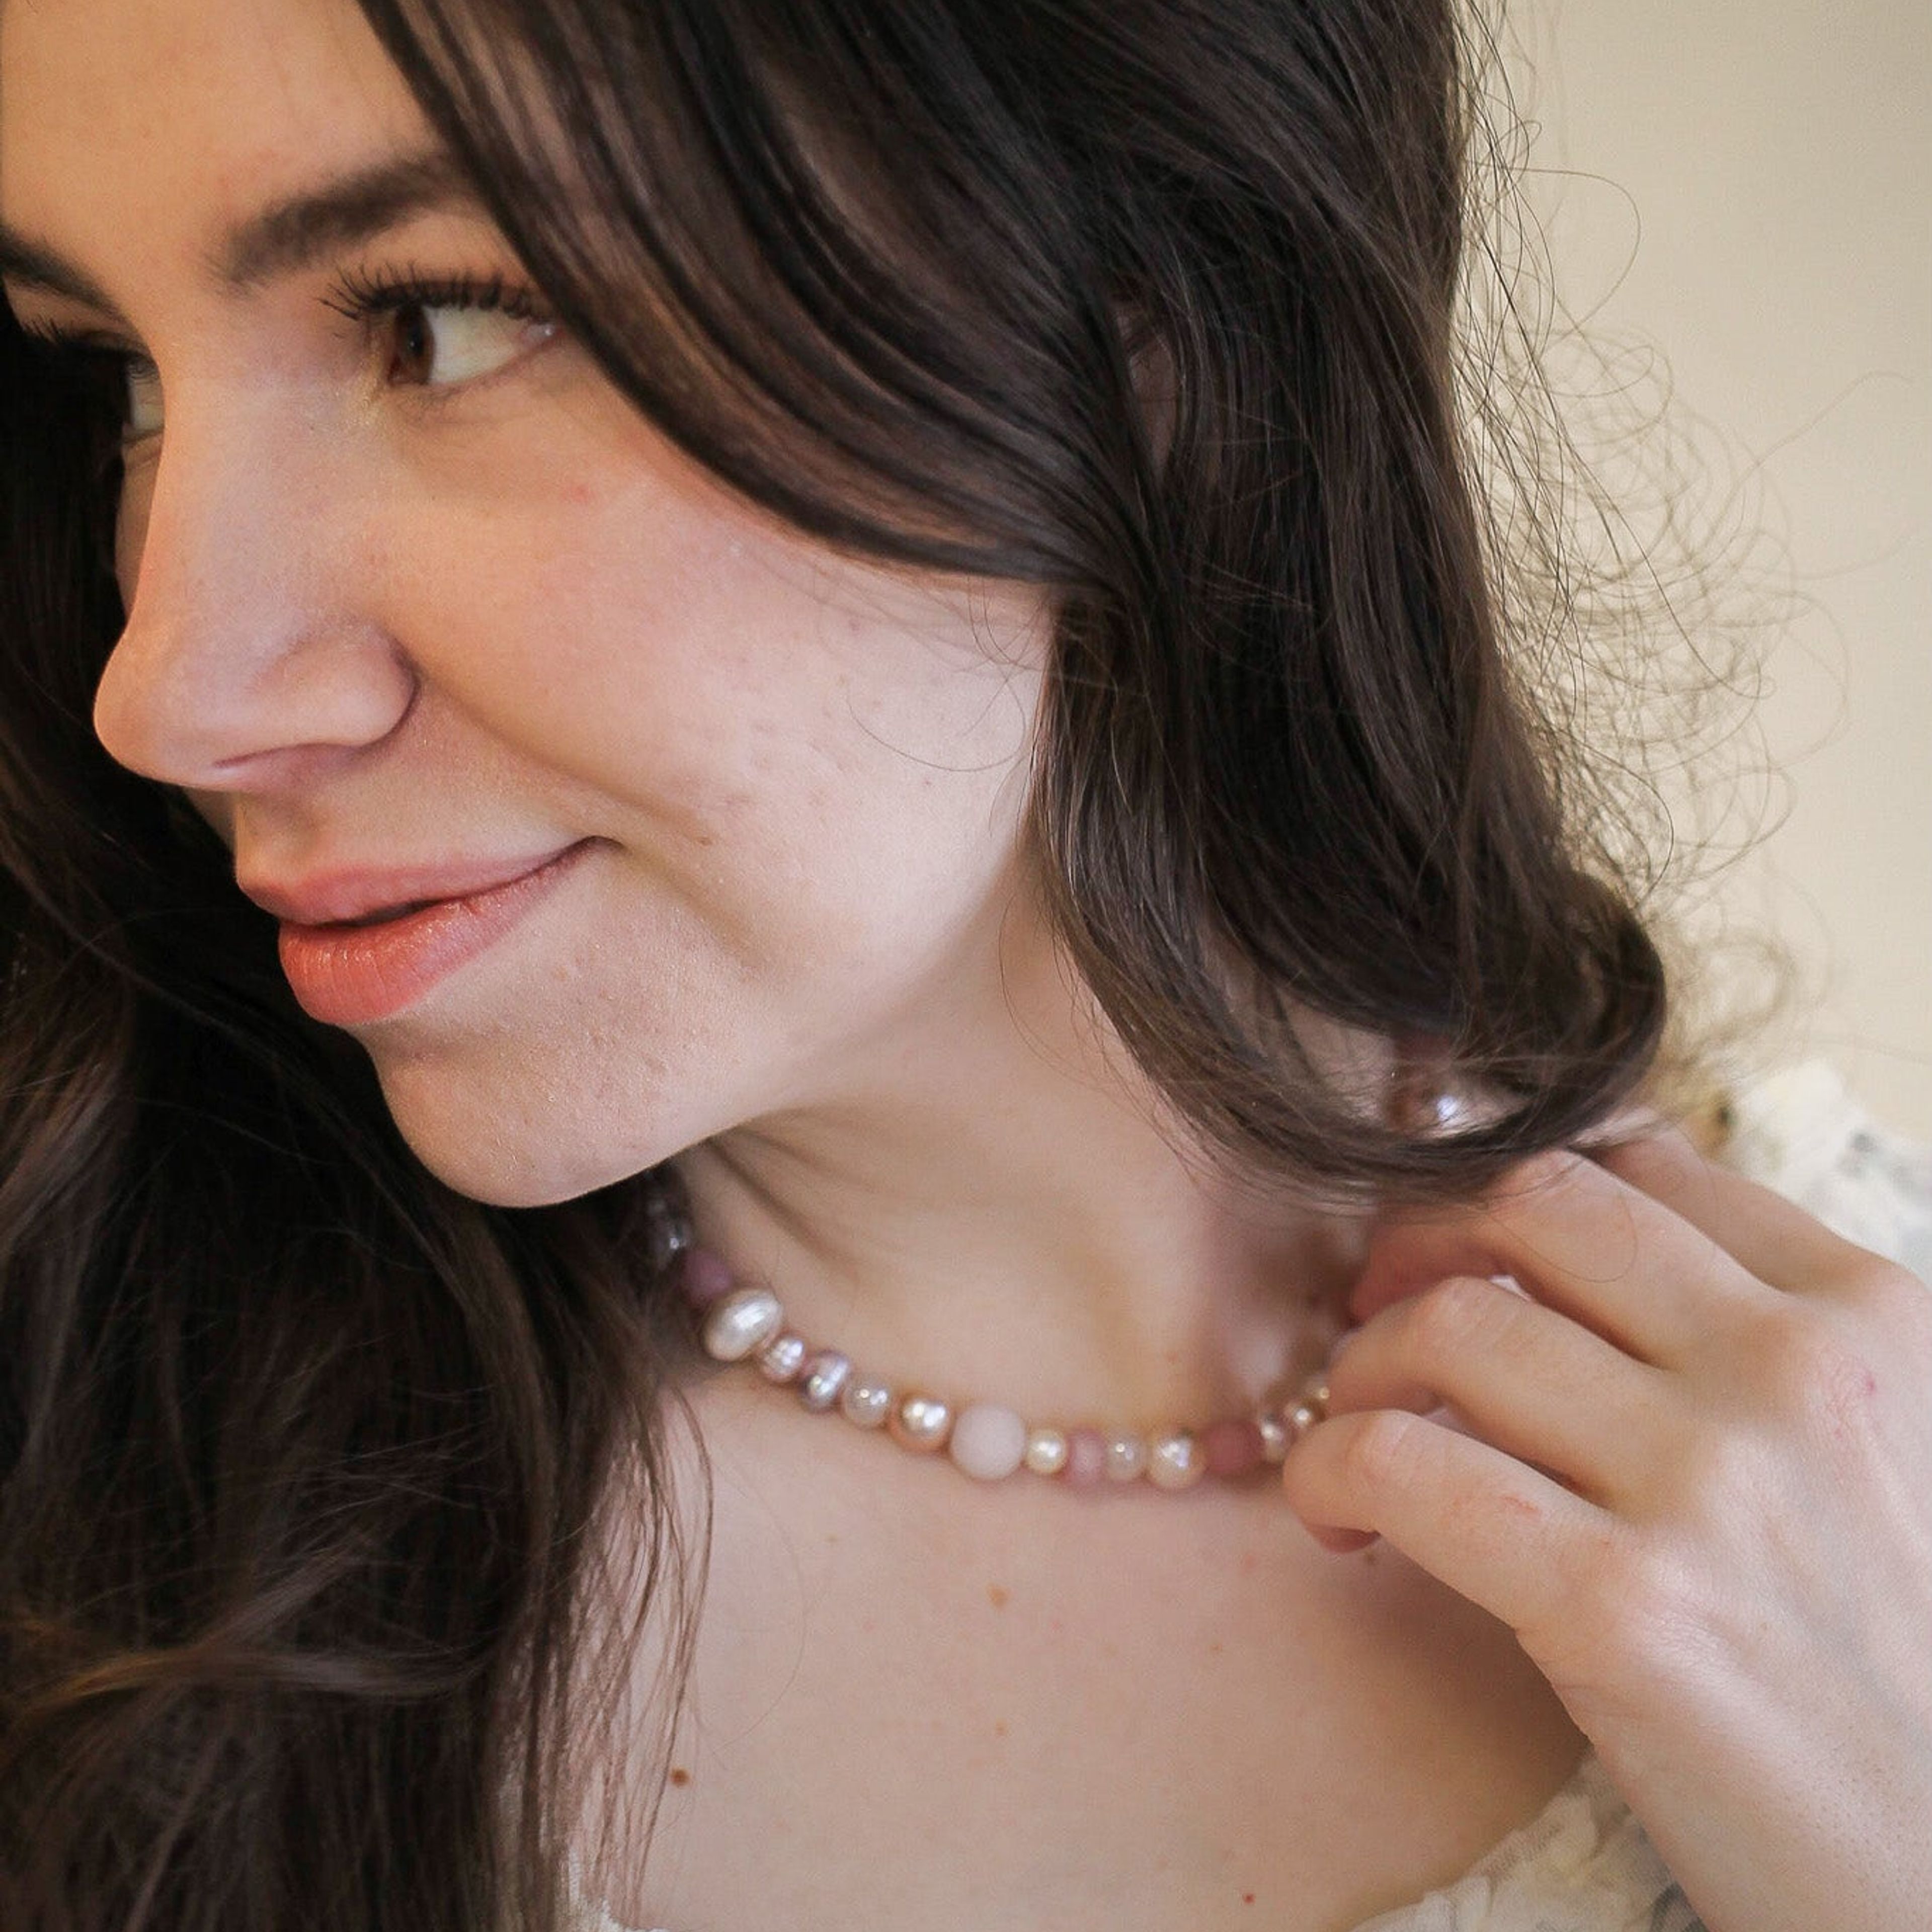 Cosette Necklace in Blush Beads